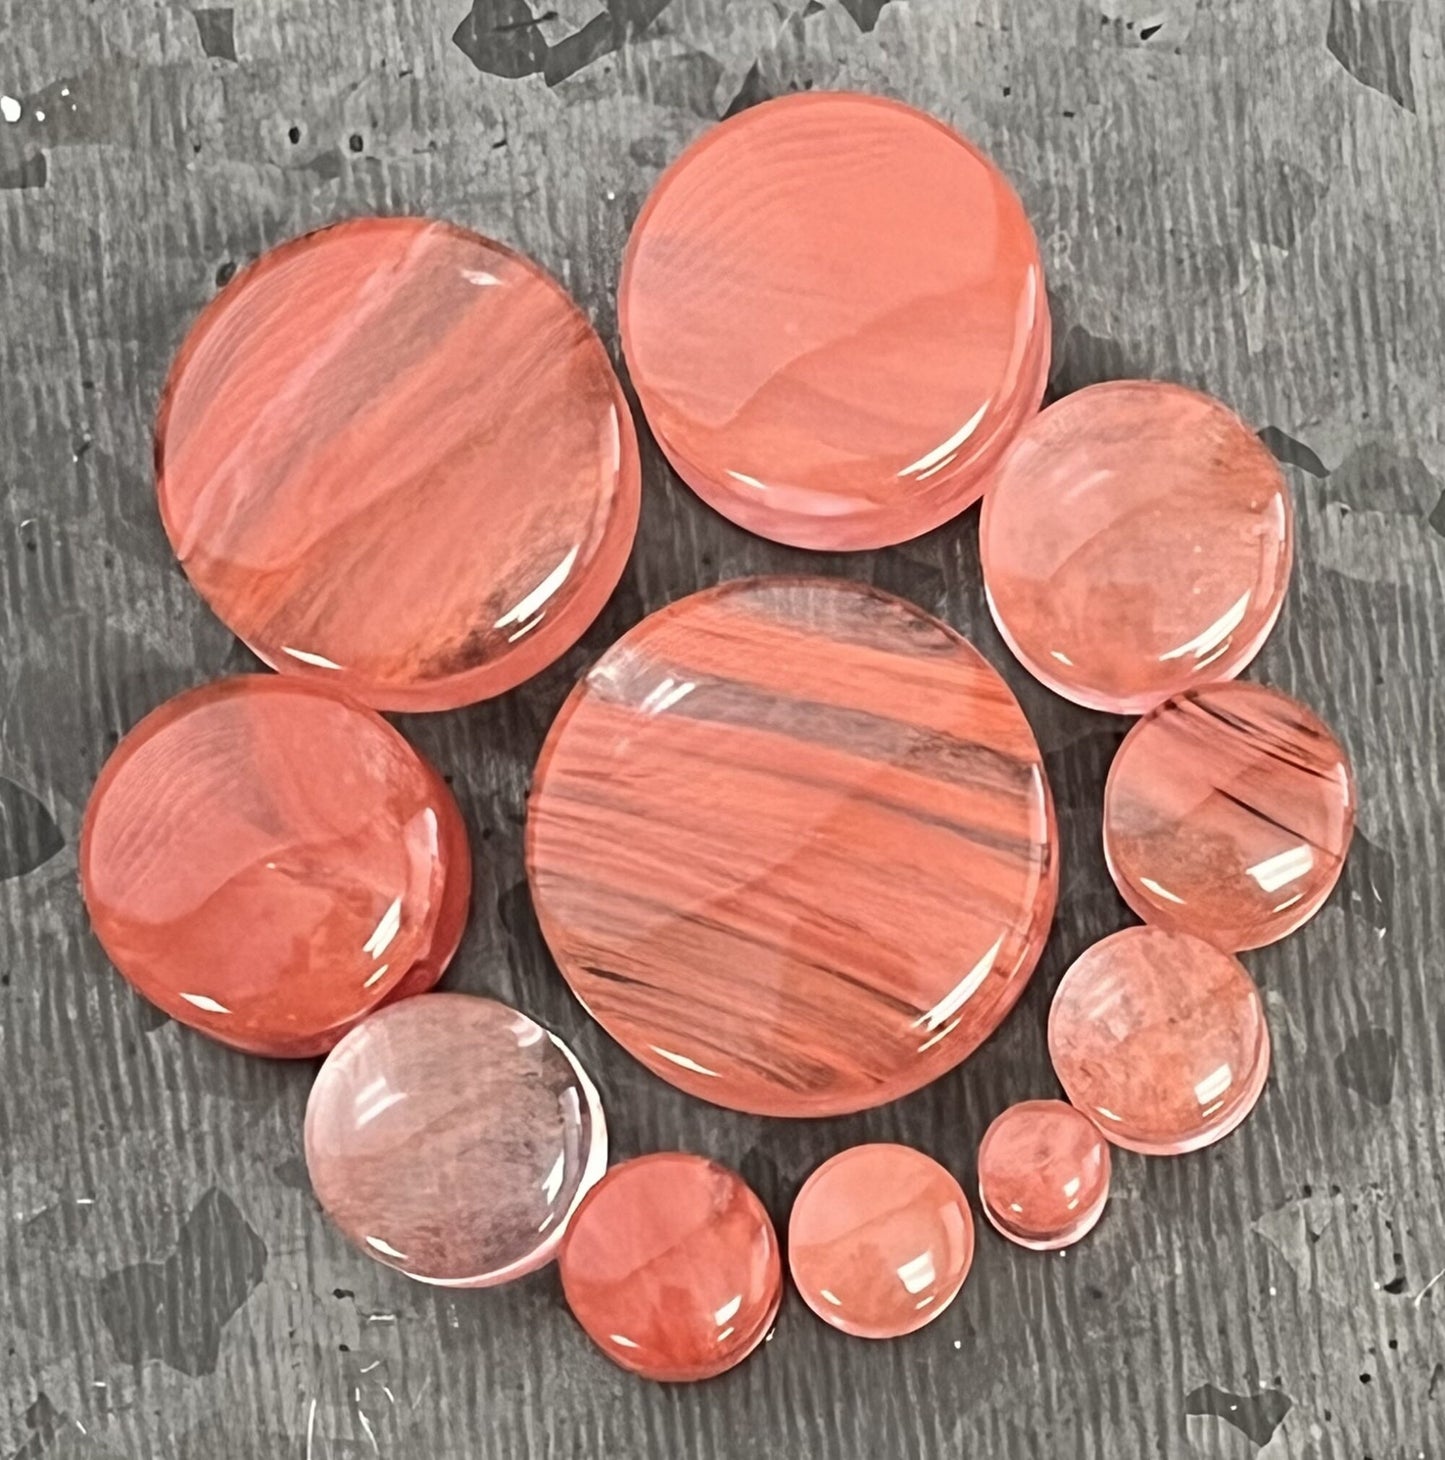 PAIR of Stunning Fresh Coral Style Double Flare Glass Plugs - Gauge 2g (6mm) thru 1&1/8" (28mm) Available!